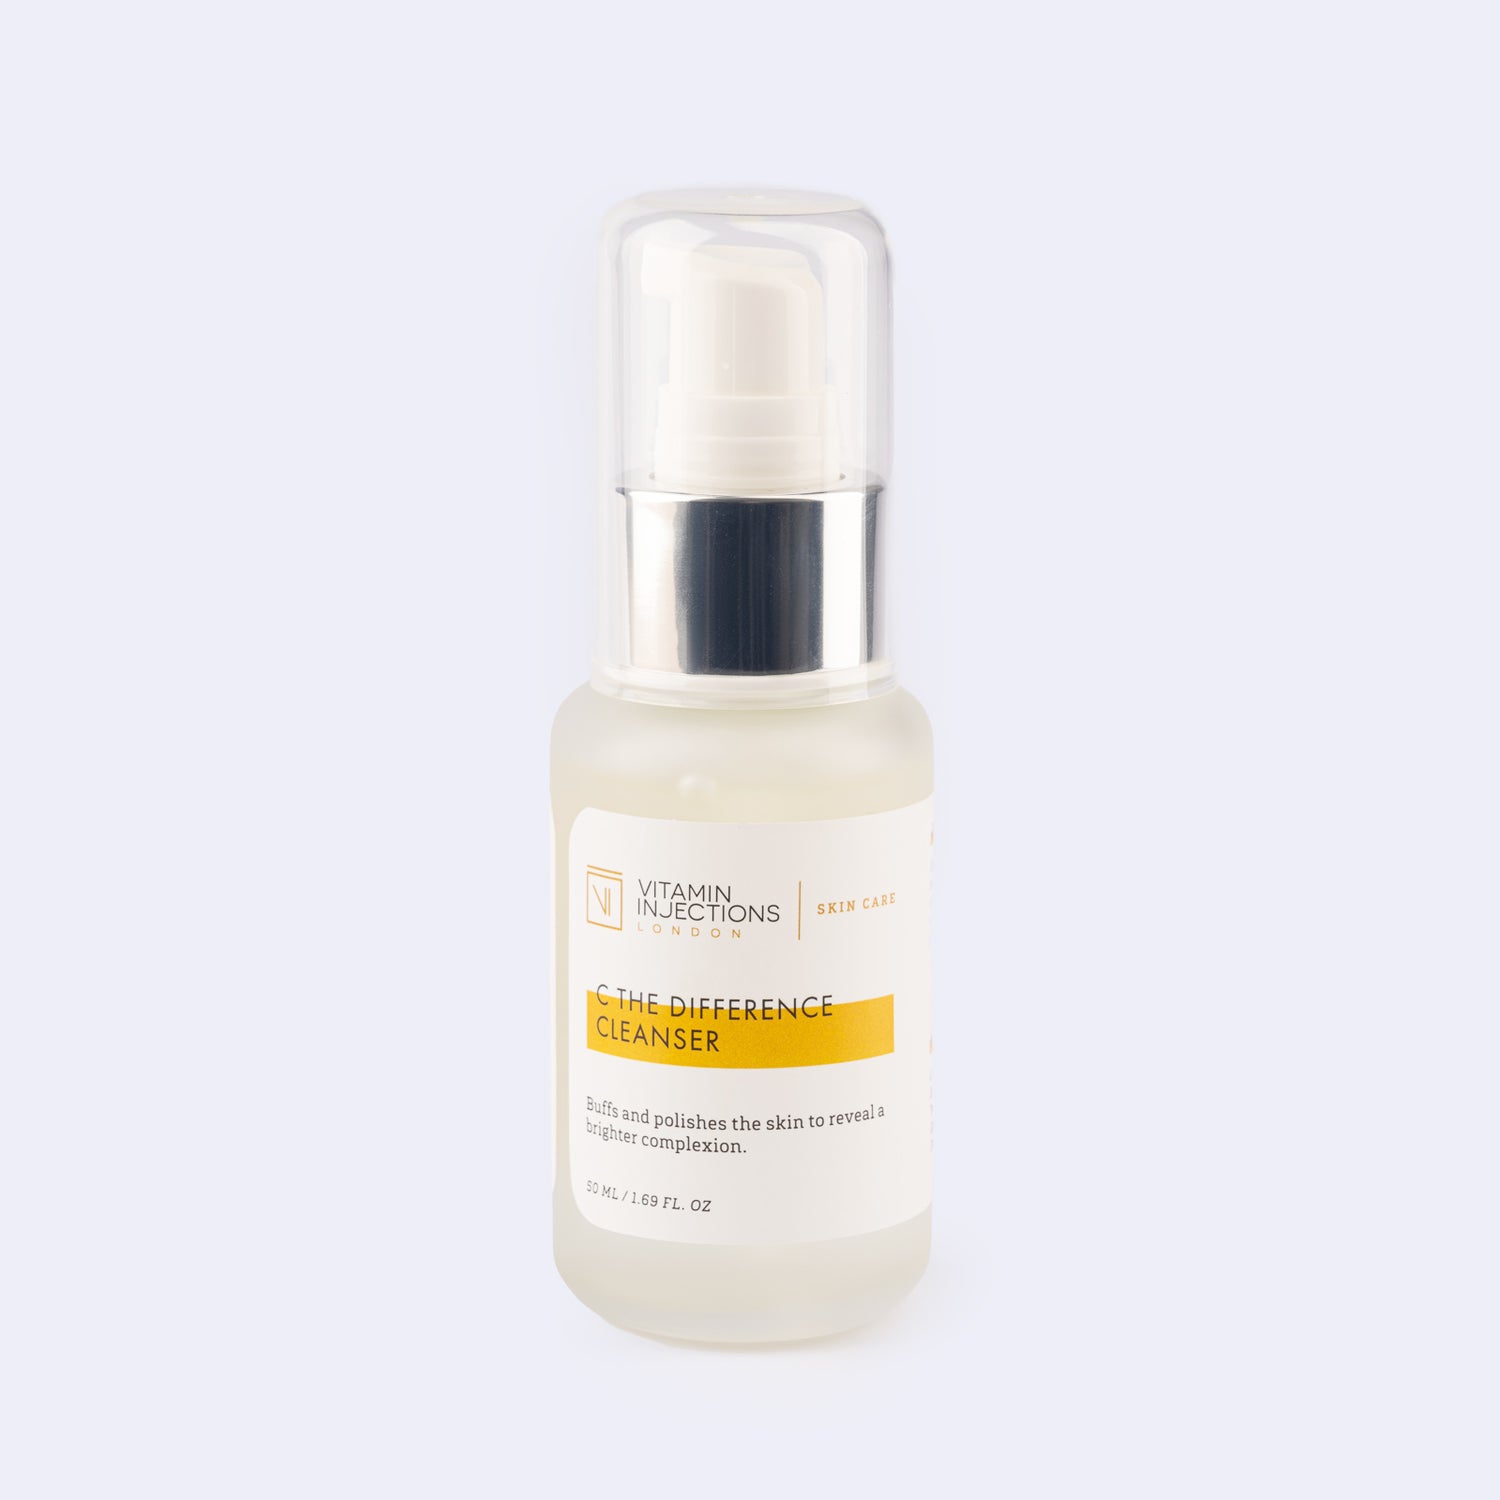 C The Difference Vitamin C Cleanser